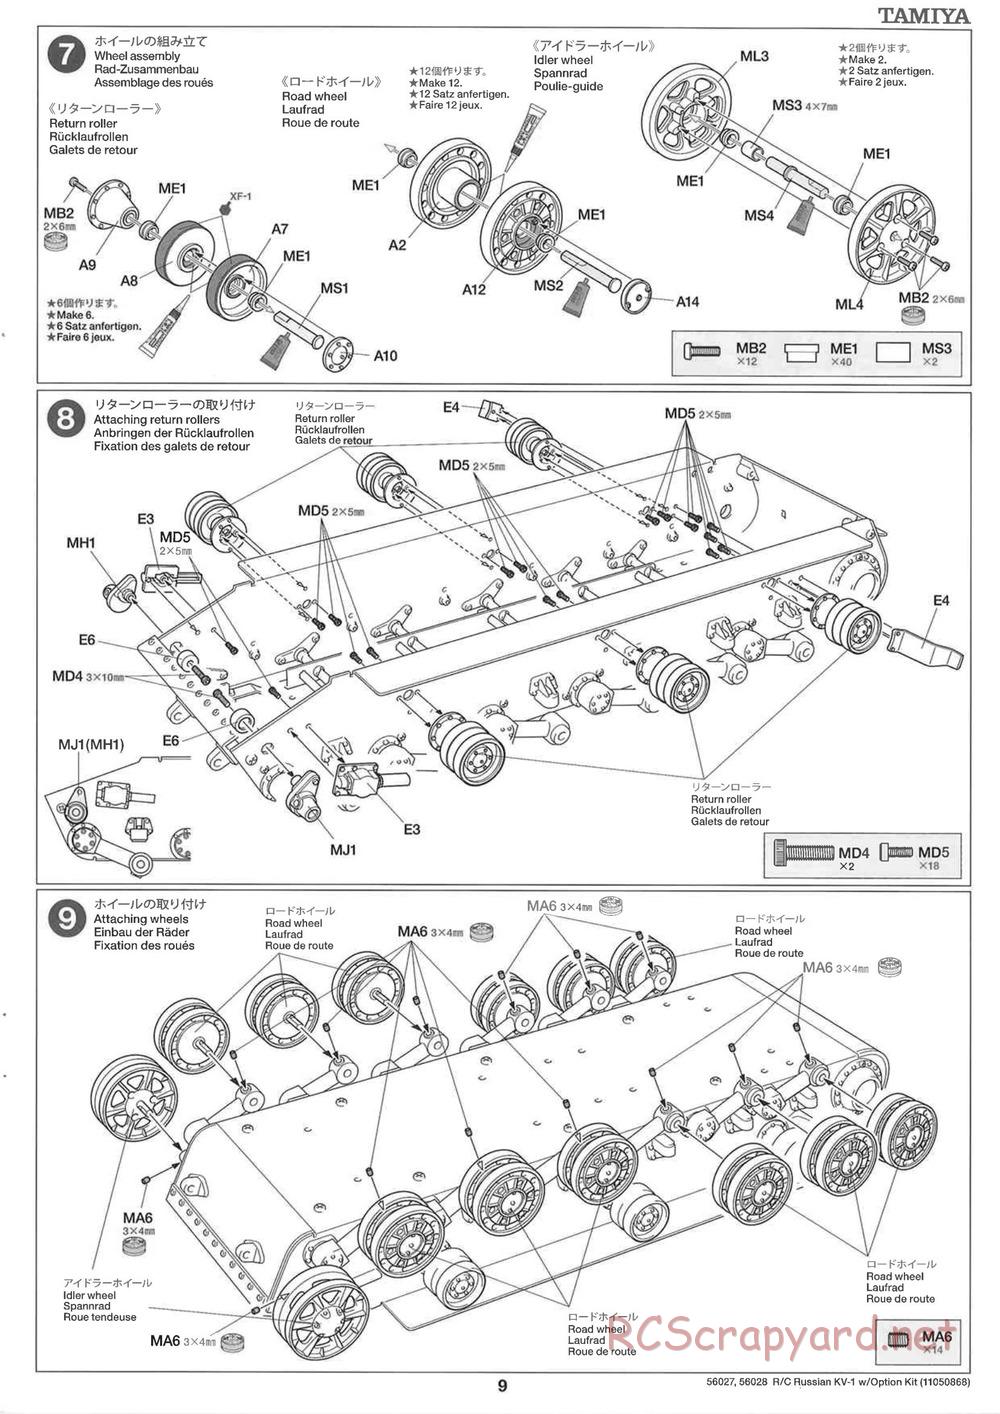 Tamiya - Russian Heavy Tank KV-1 - 1/16 Scale Chassis - Manual - Page 9